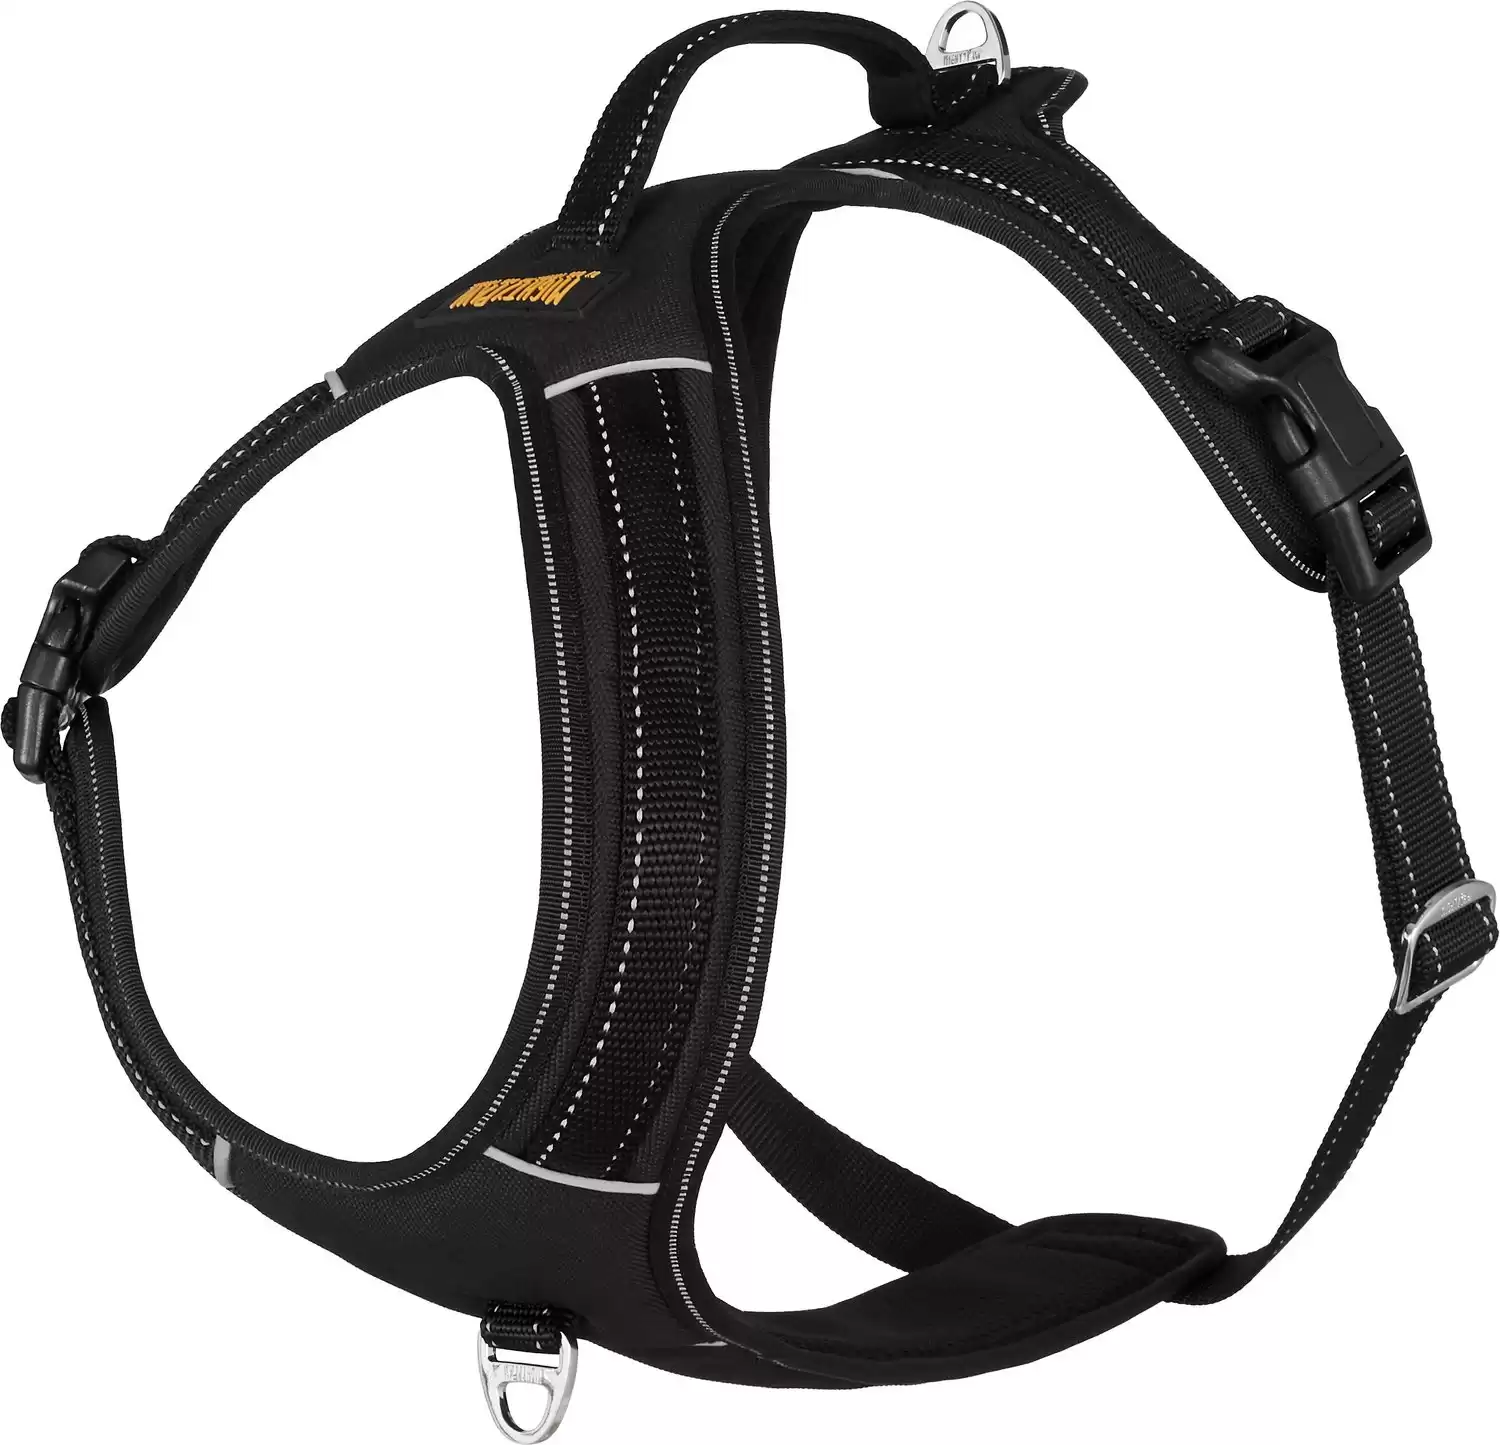 Mighty Paw Padded Sport Reflective Anti-Pull Dog Harness